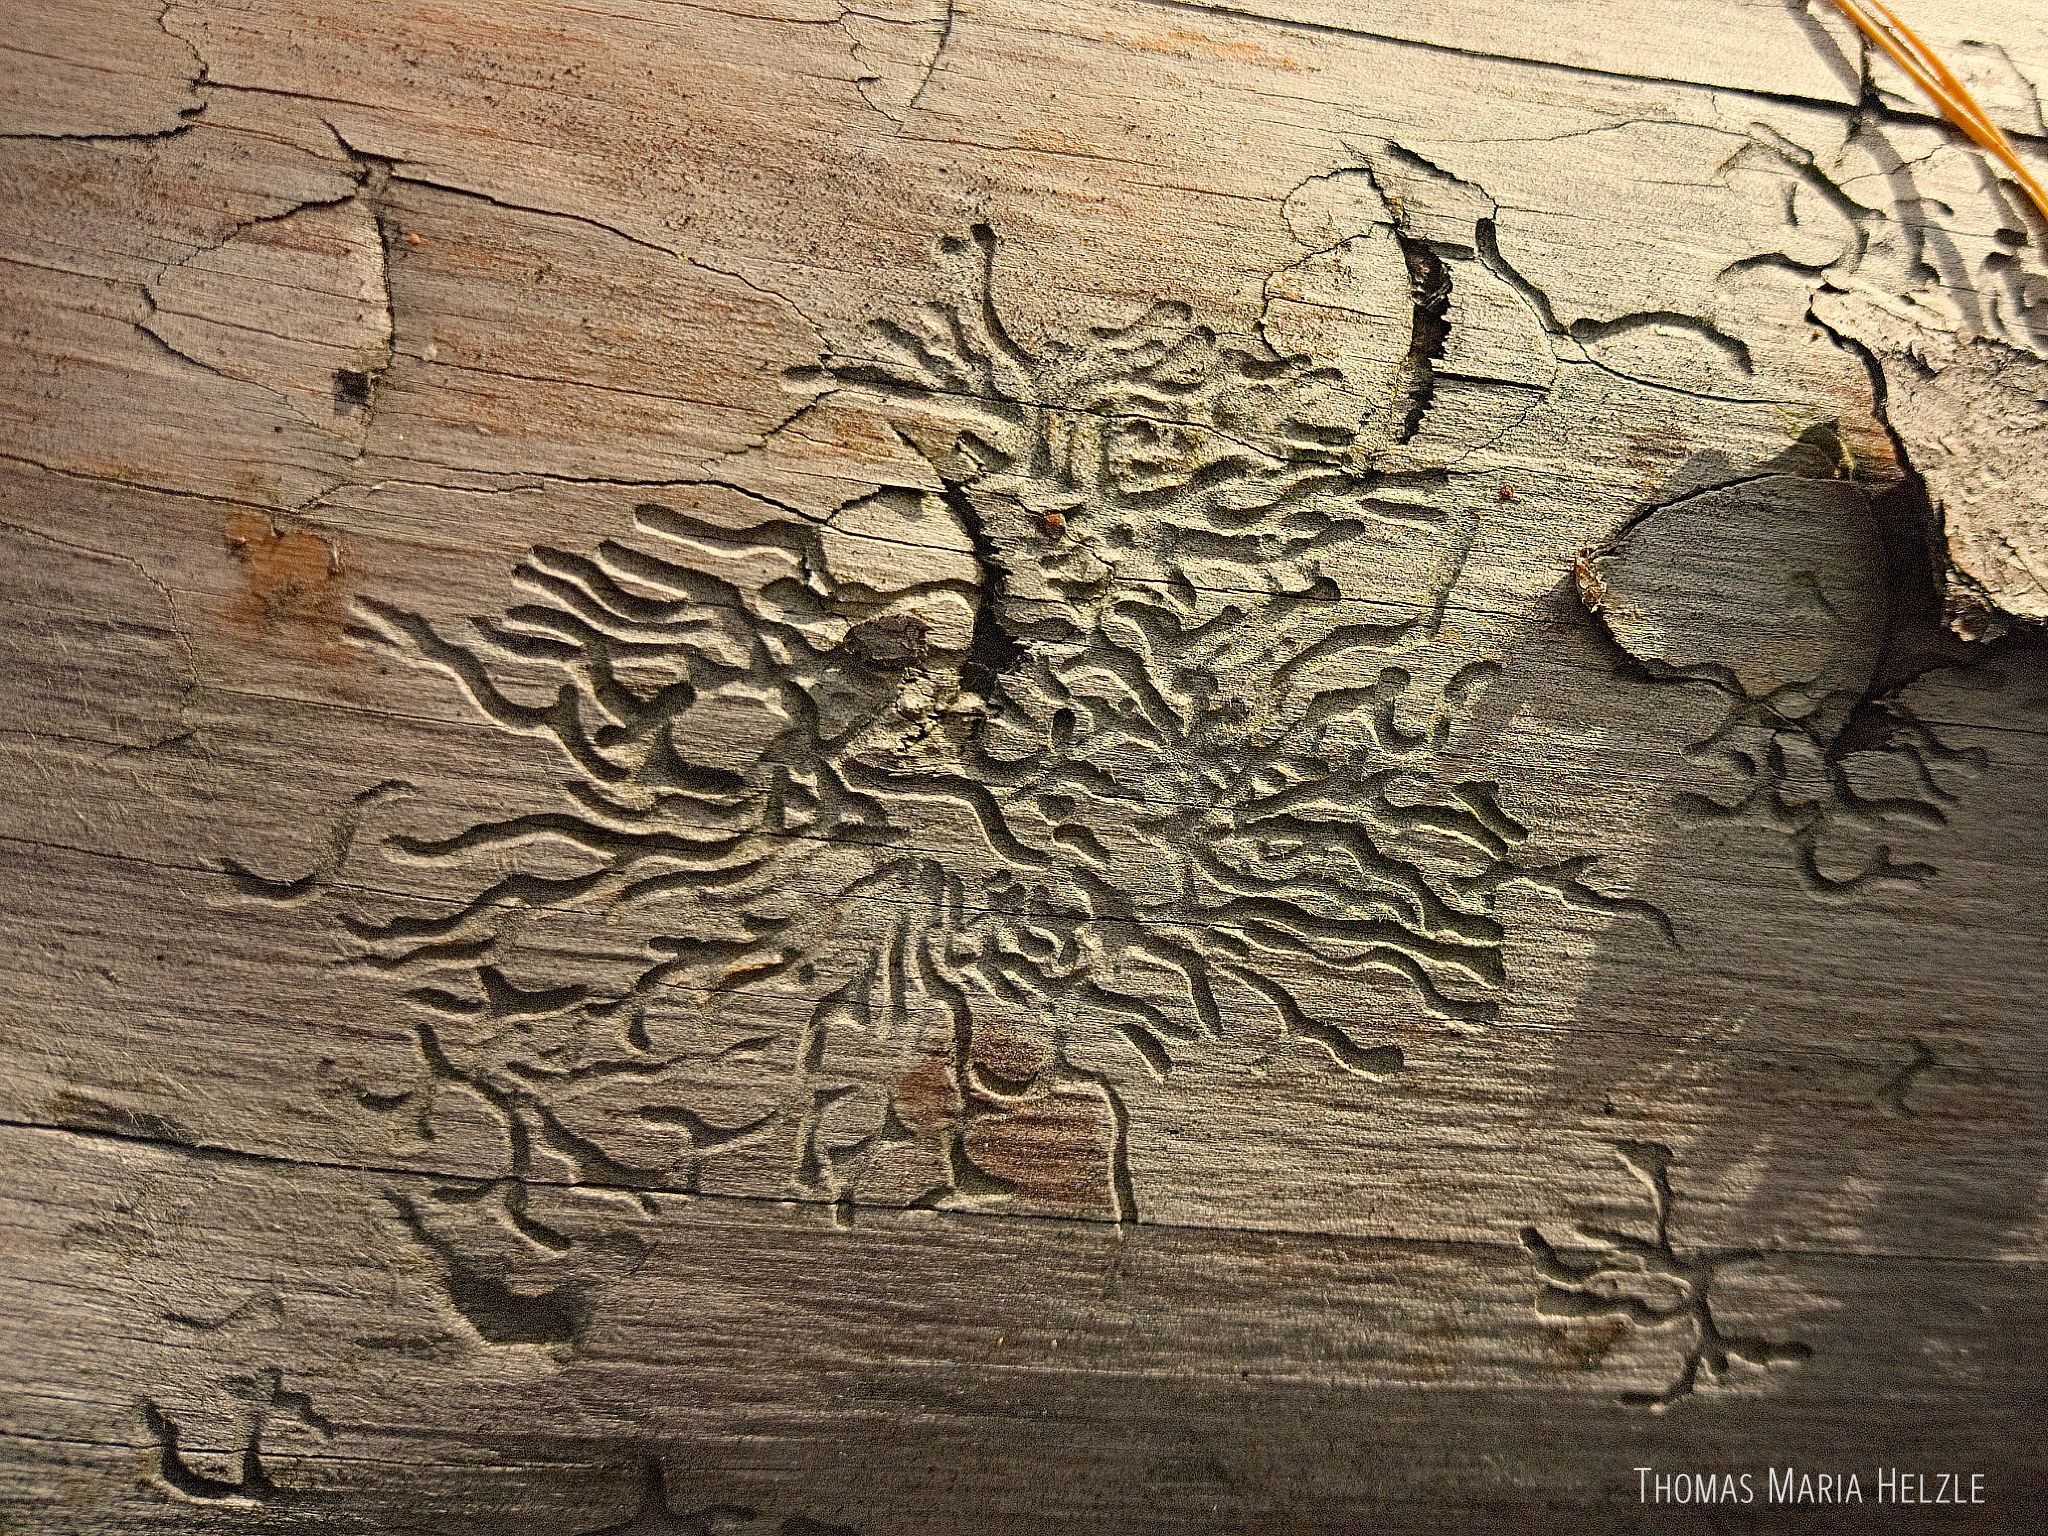 Closeup of the gnaw marks of woodworms on a fallen pine tree. They build fascinating structures like alien script characters or very organic town maps.